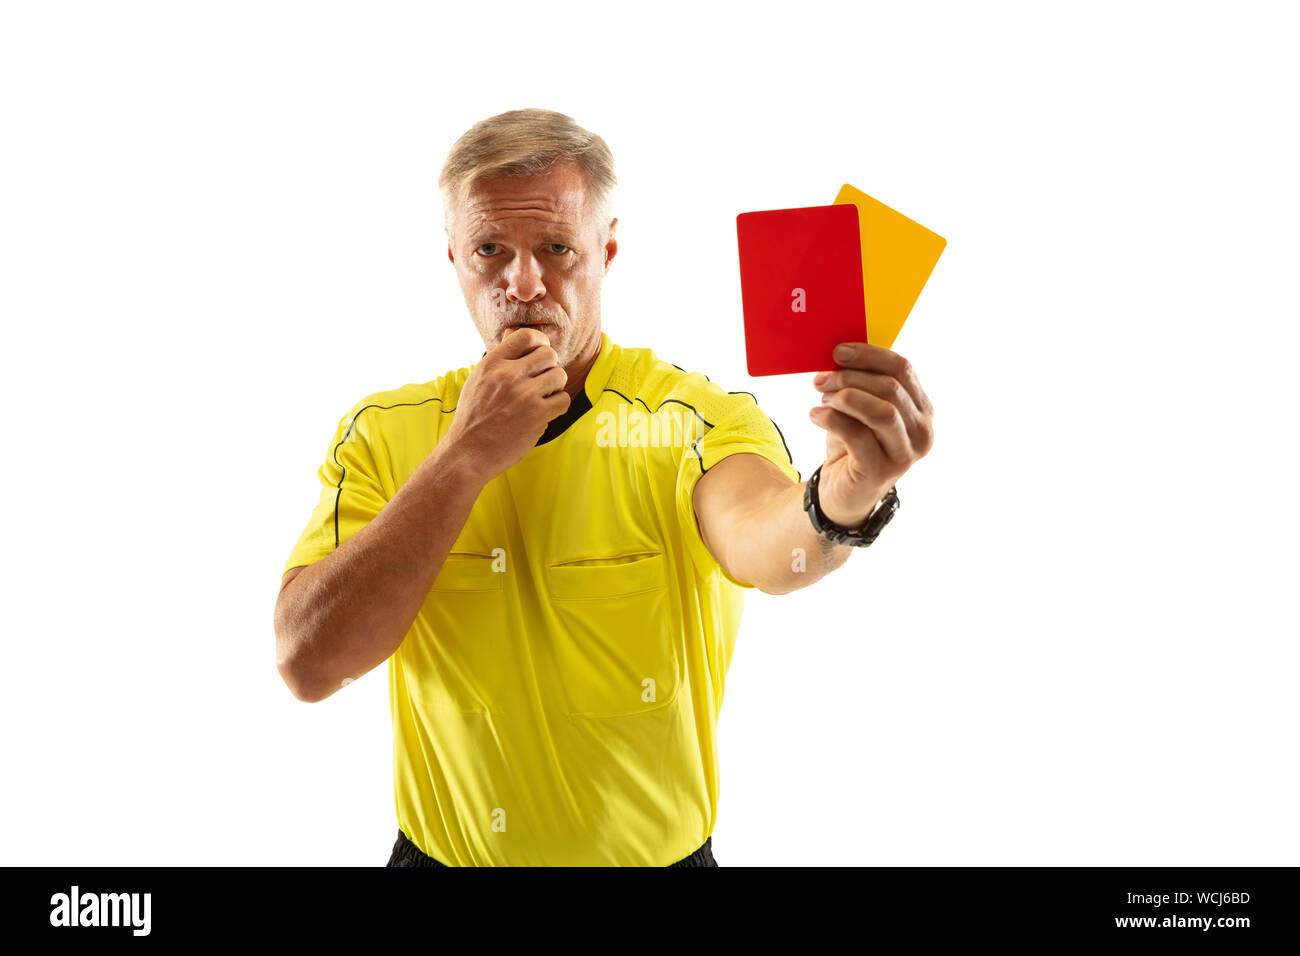 Referee showing a red card player Stock Photos and Images